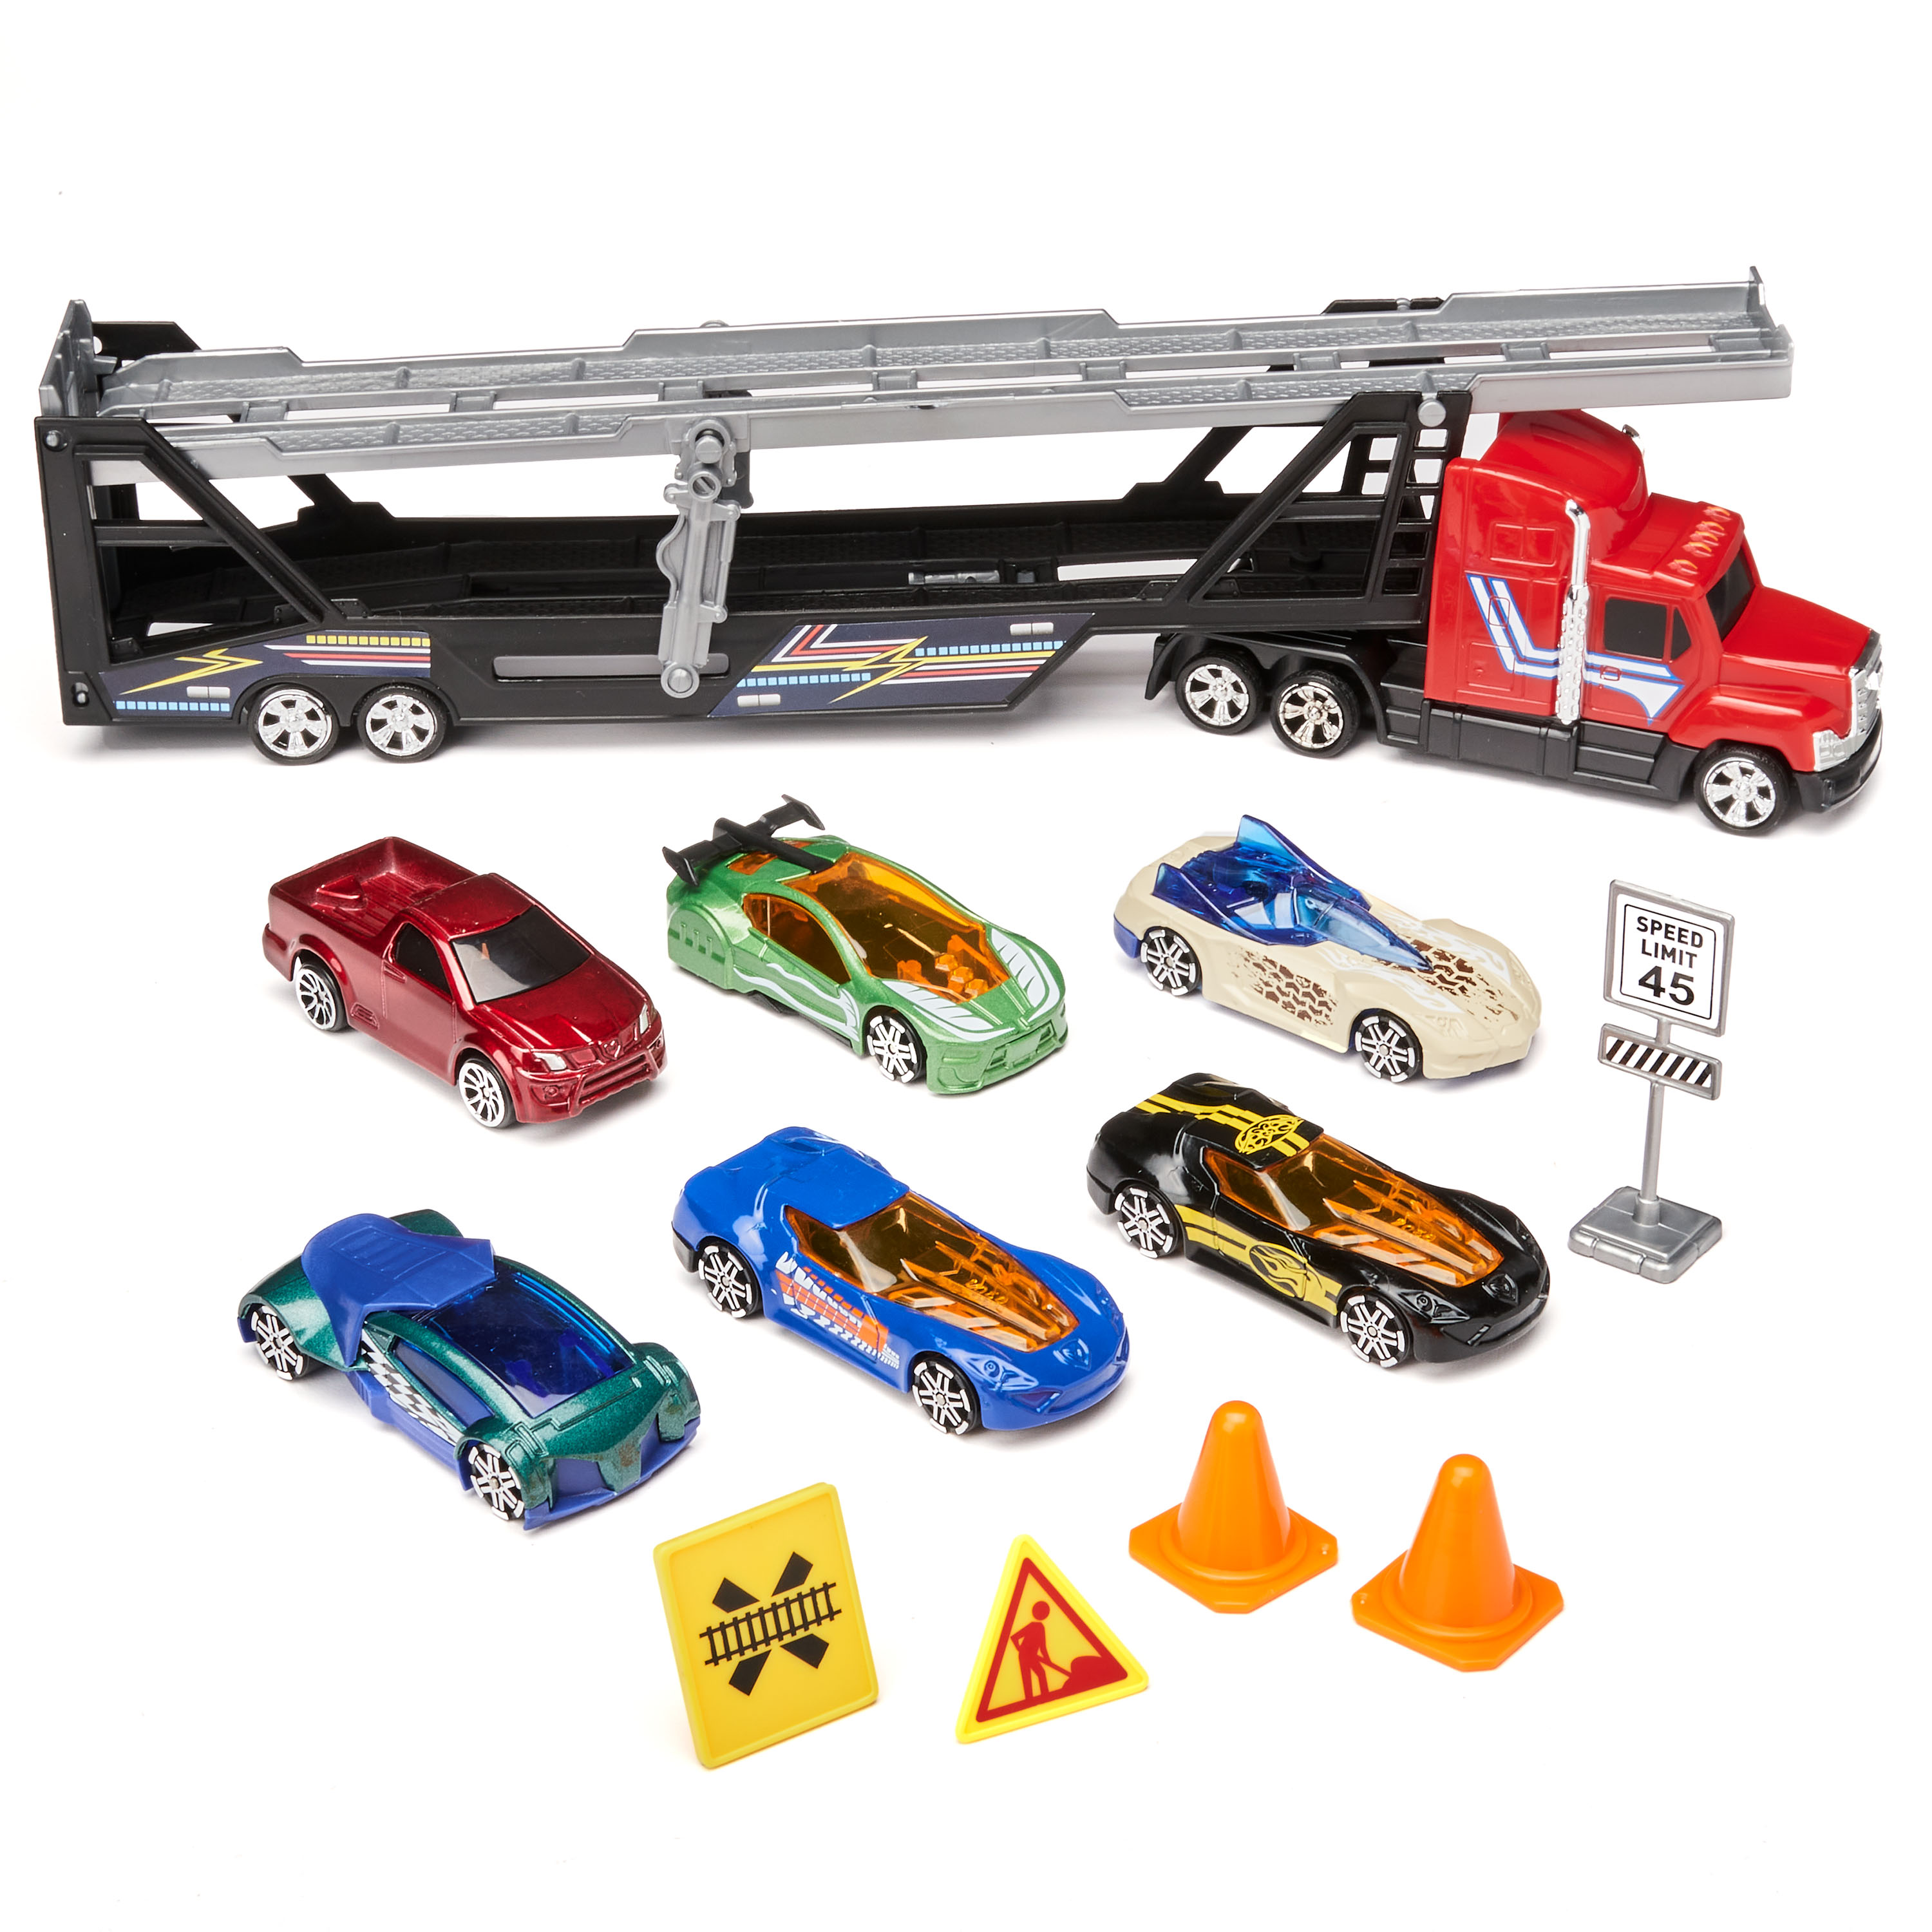 Adventure Force Die-Cast Transporter Play Set, 12 Pieces - image 1 of 4